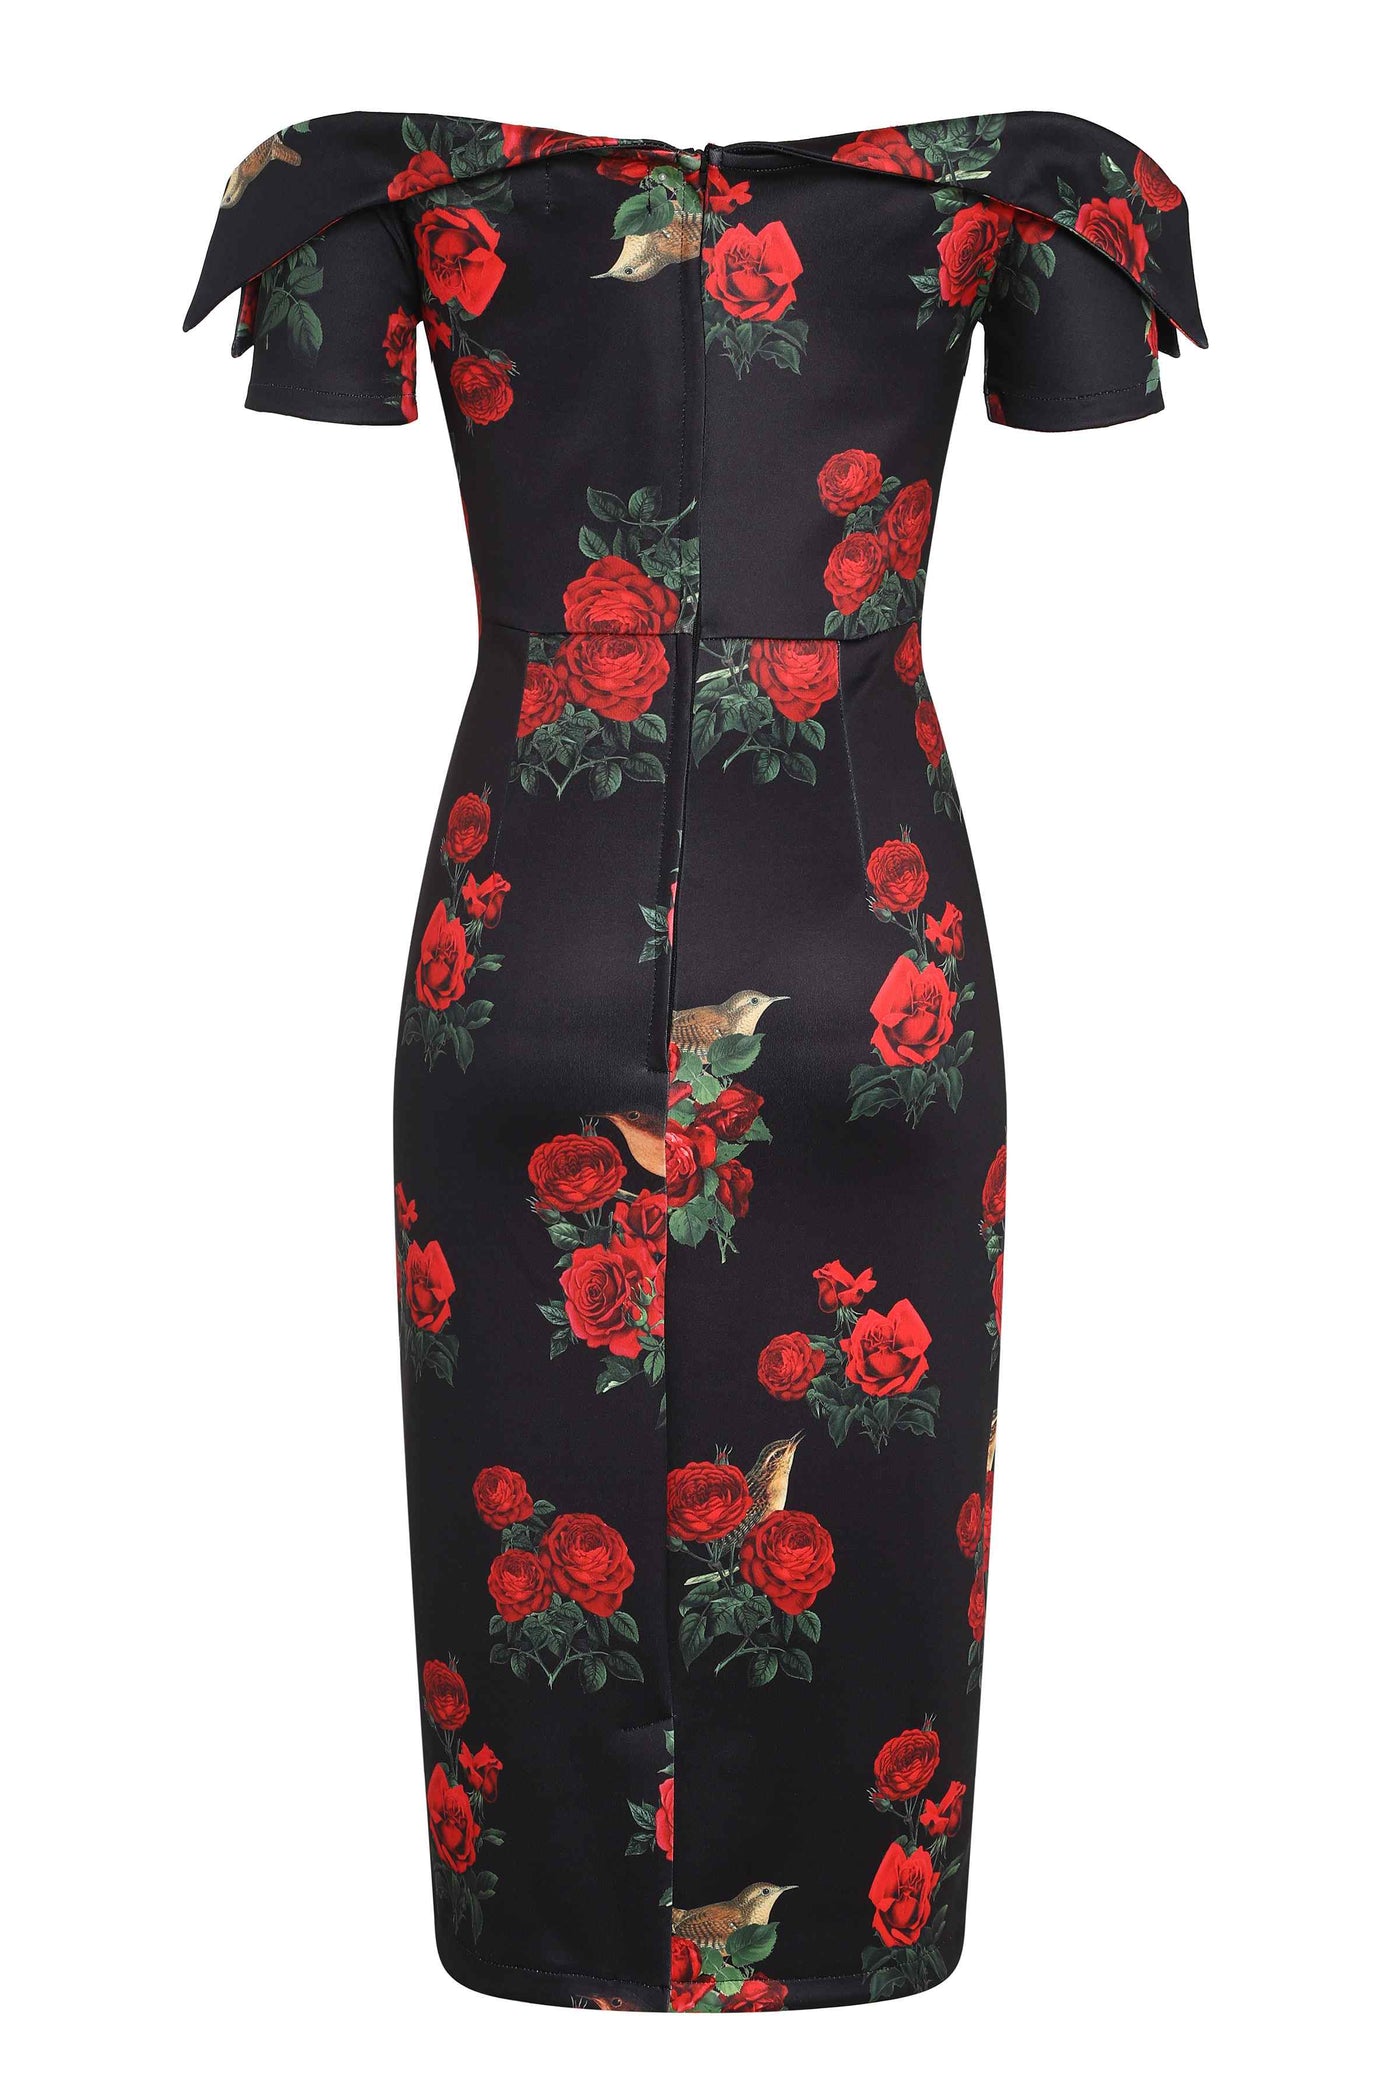 Back View of Red Rose and Bird Print Pencil Dress in Black